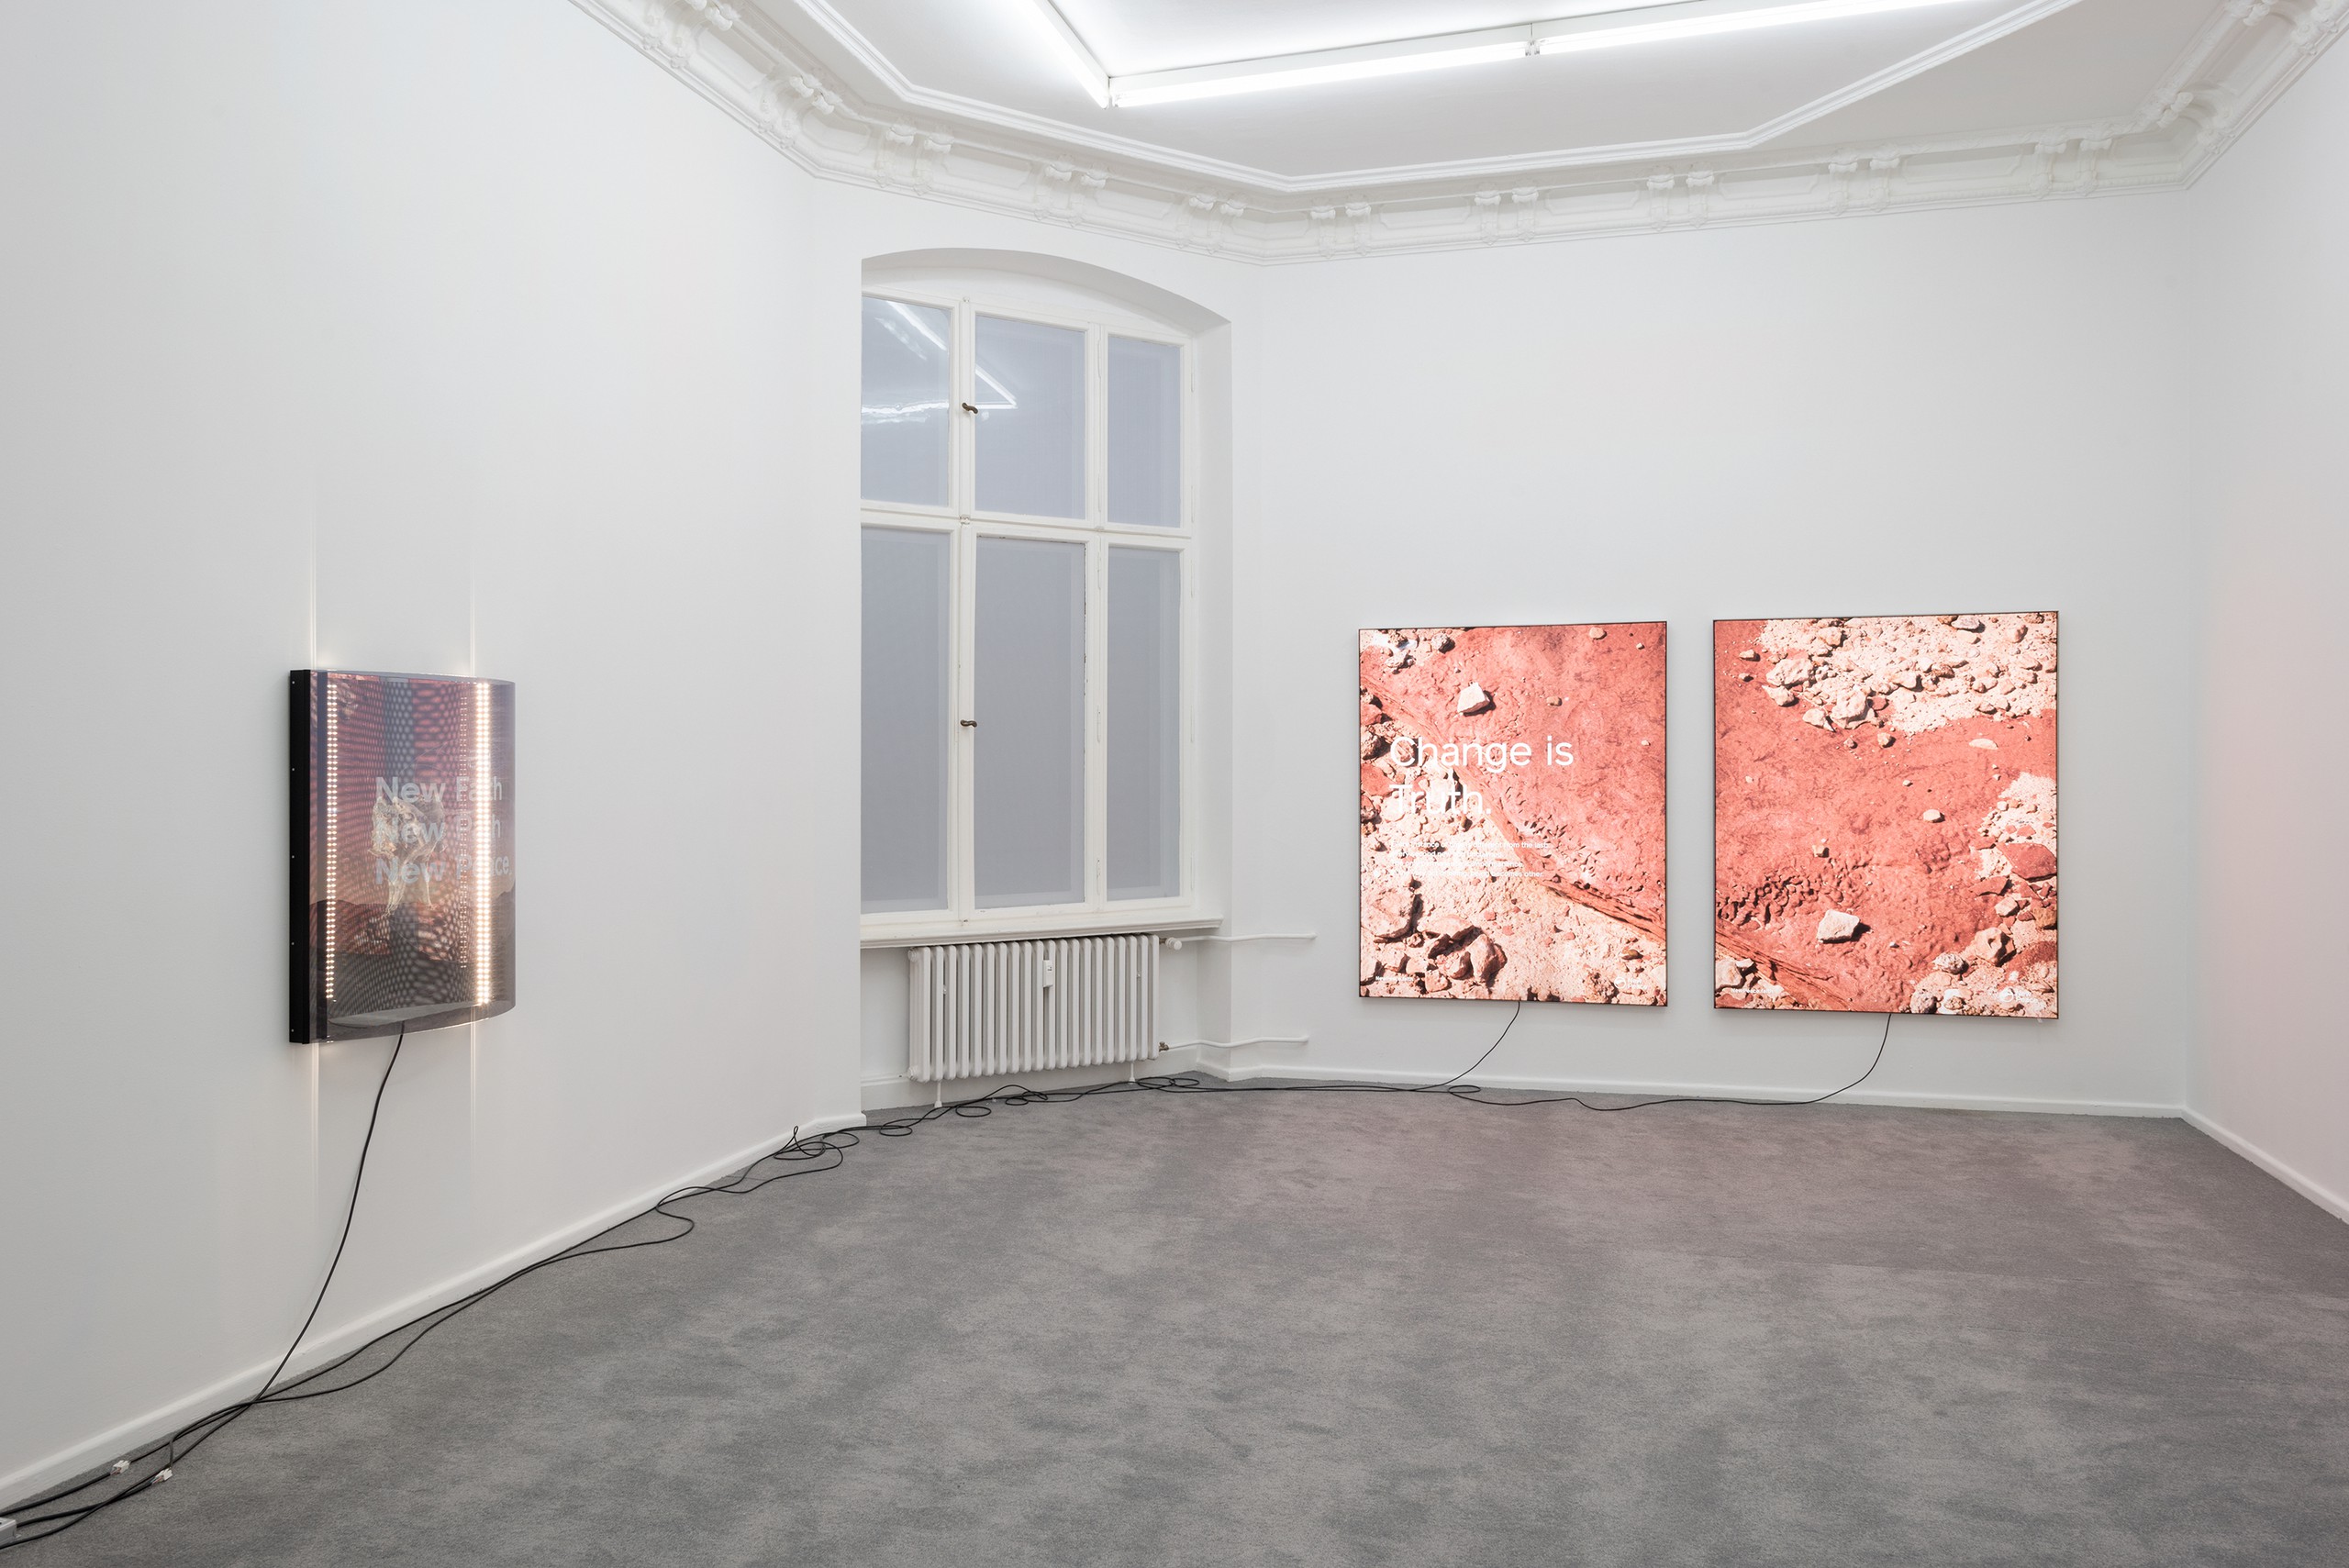 Installation view, Campaign for A New Protocol, Part I, Société, Berlin, 2018